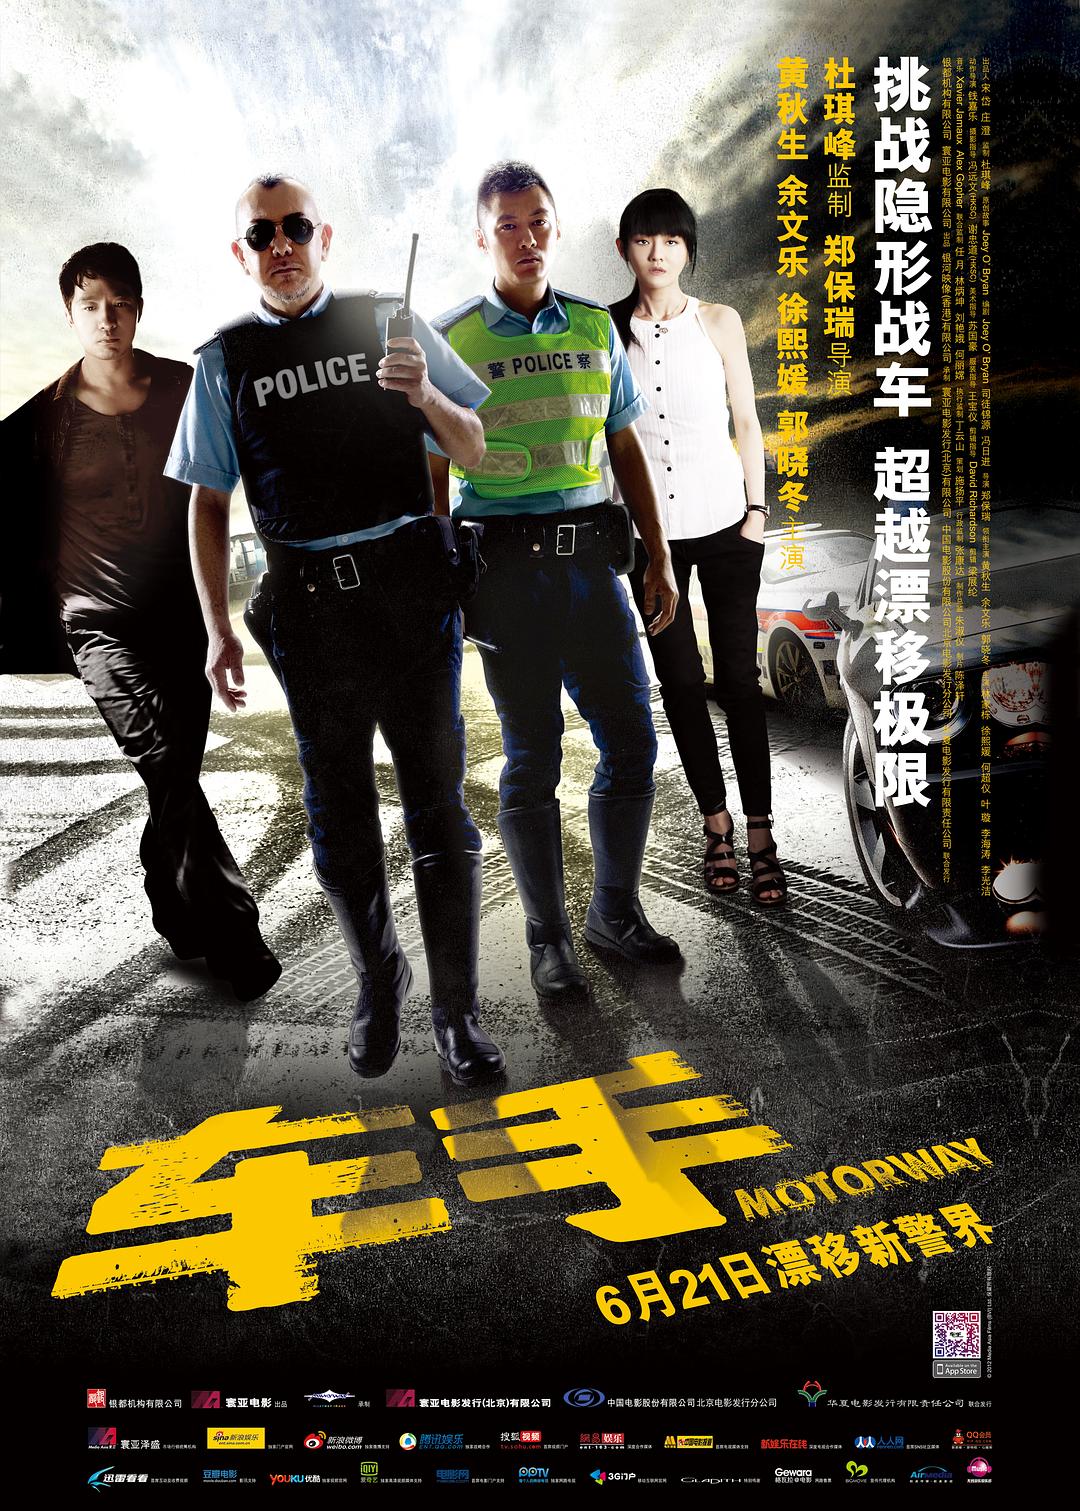  Motorway.2012.CHINESE.1080p.BluRay.x264.DTS-FGT 7.19GB-1.png